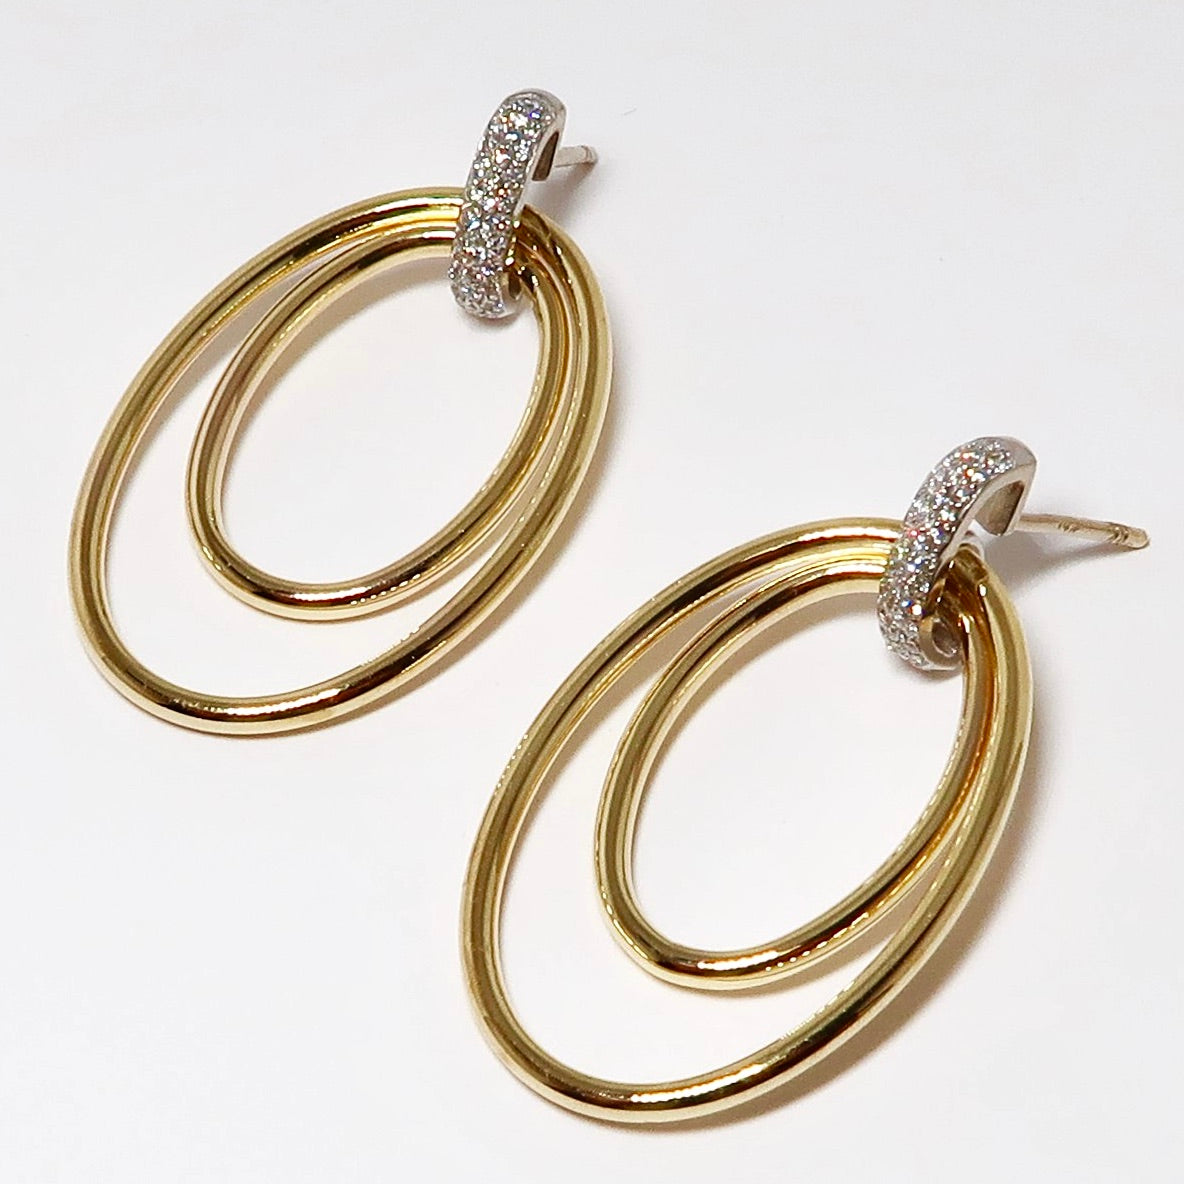 14k Yellow Gold Oval Link Earrings with Pave Diamond Top